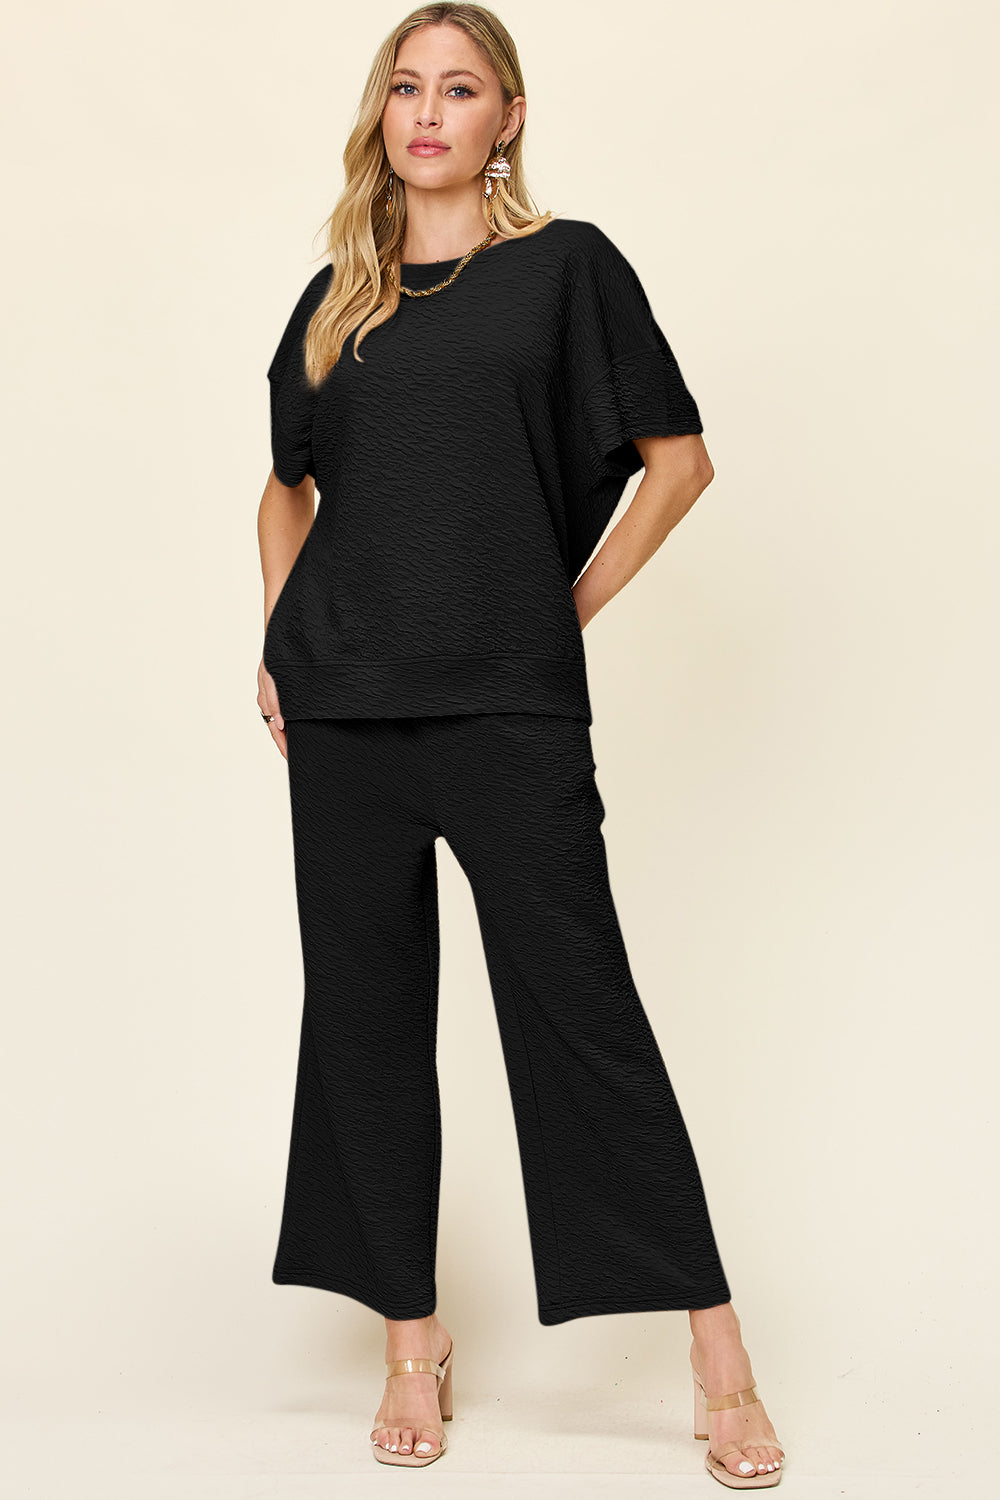 Double Take Full Size Texture Short Sleeve Top and Pants Set